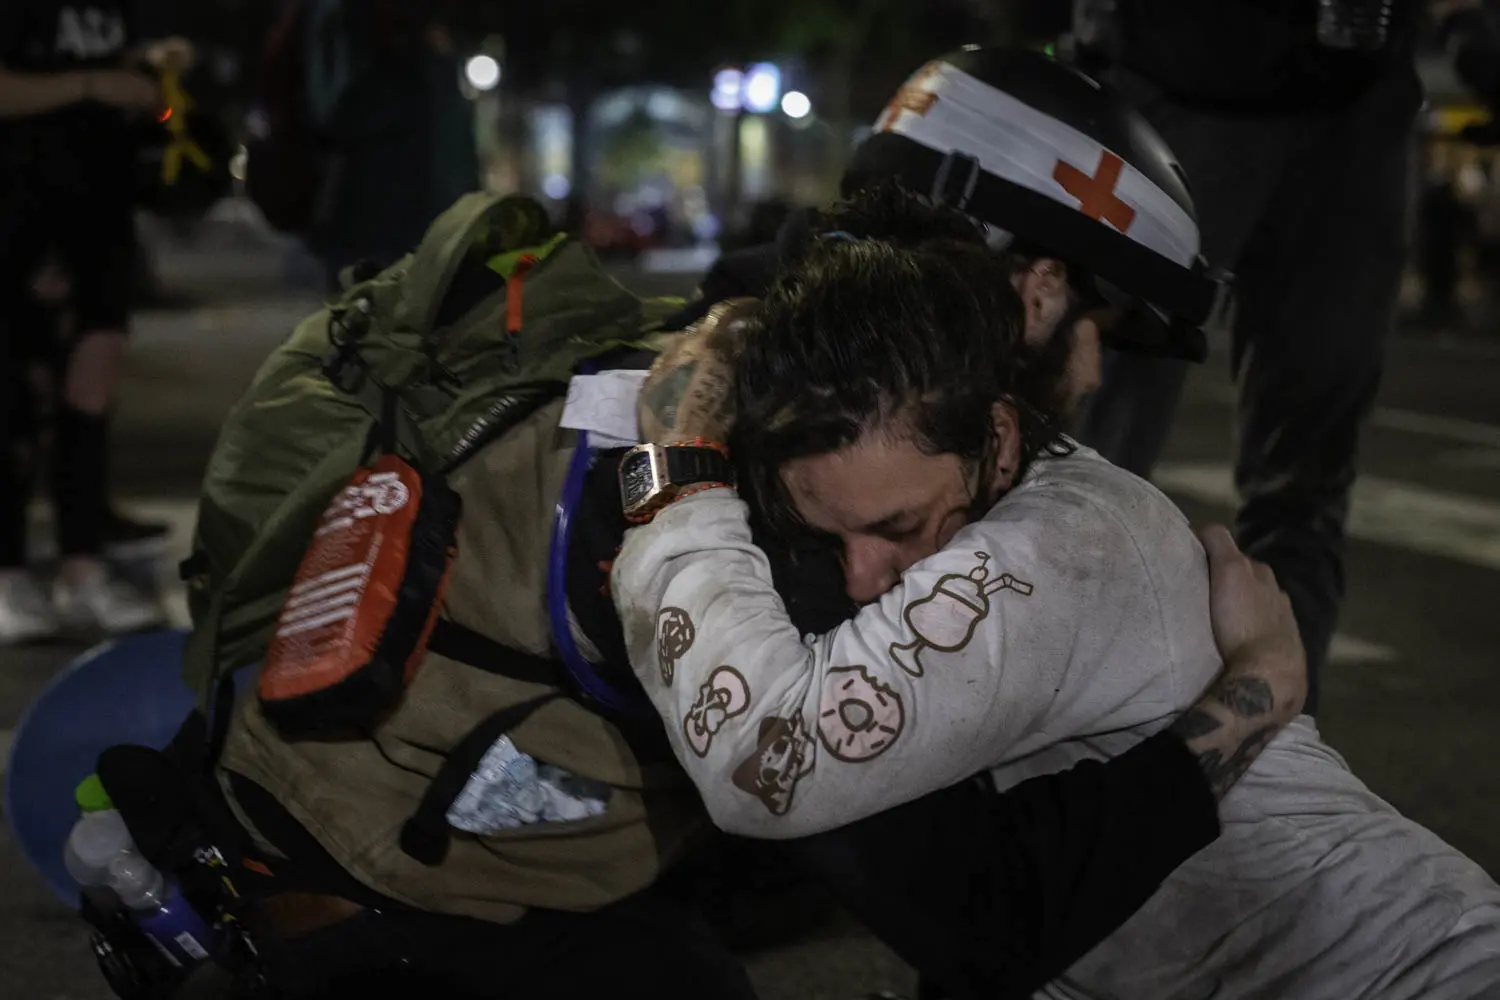 A medic embraces someone who has collapsed in the street.